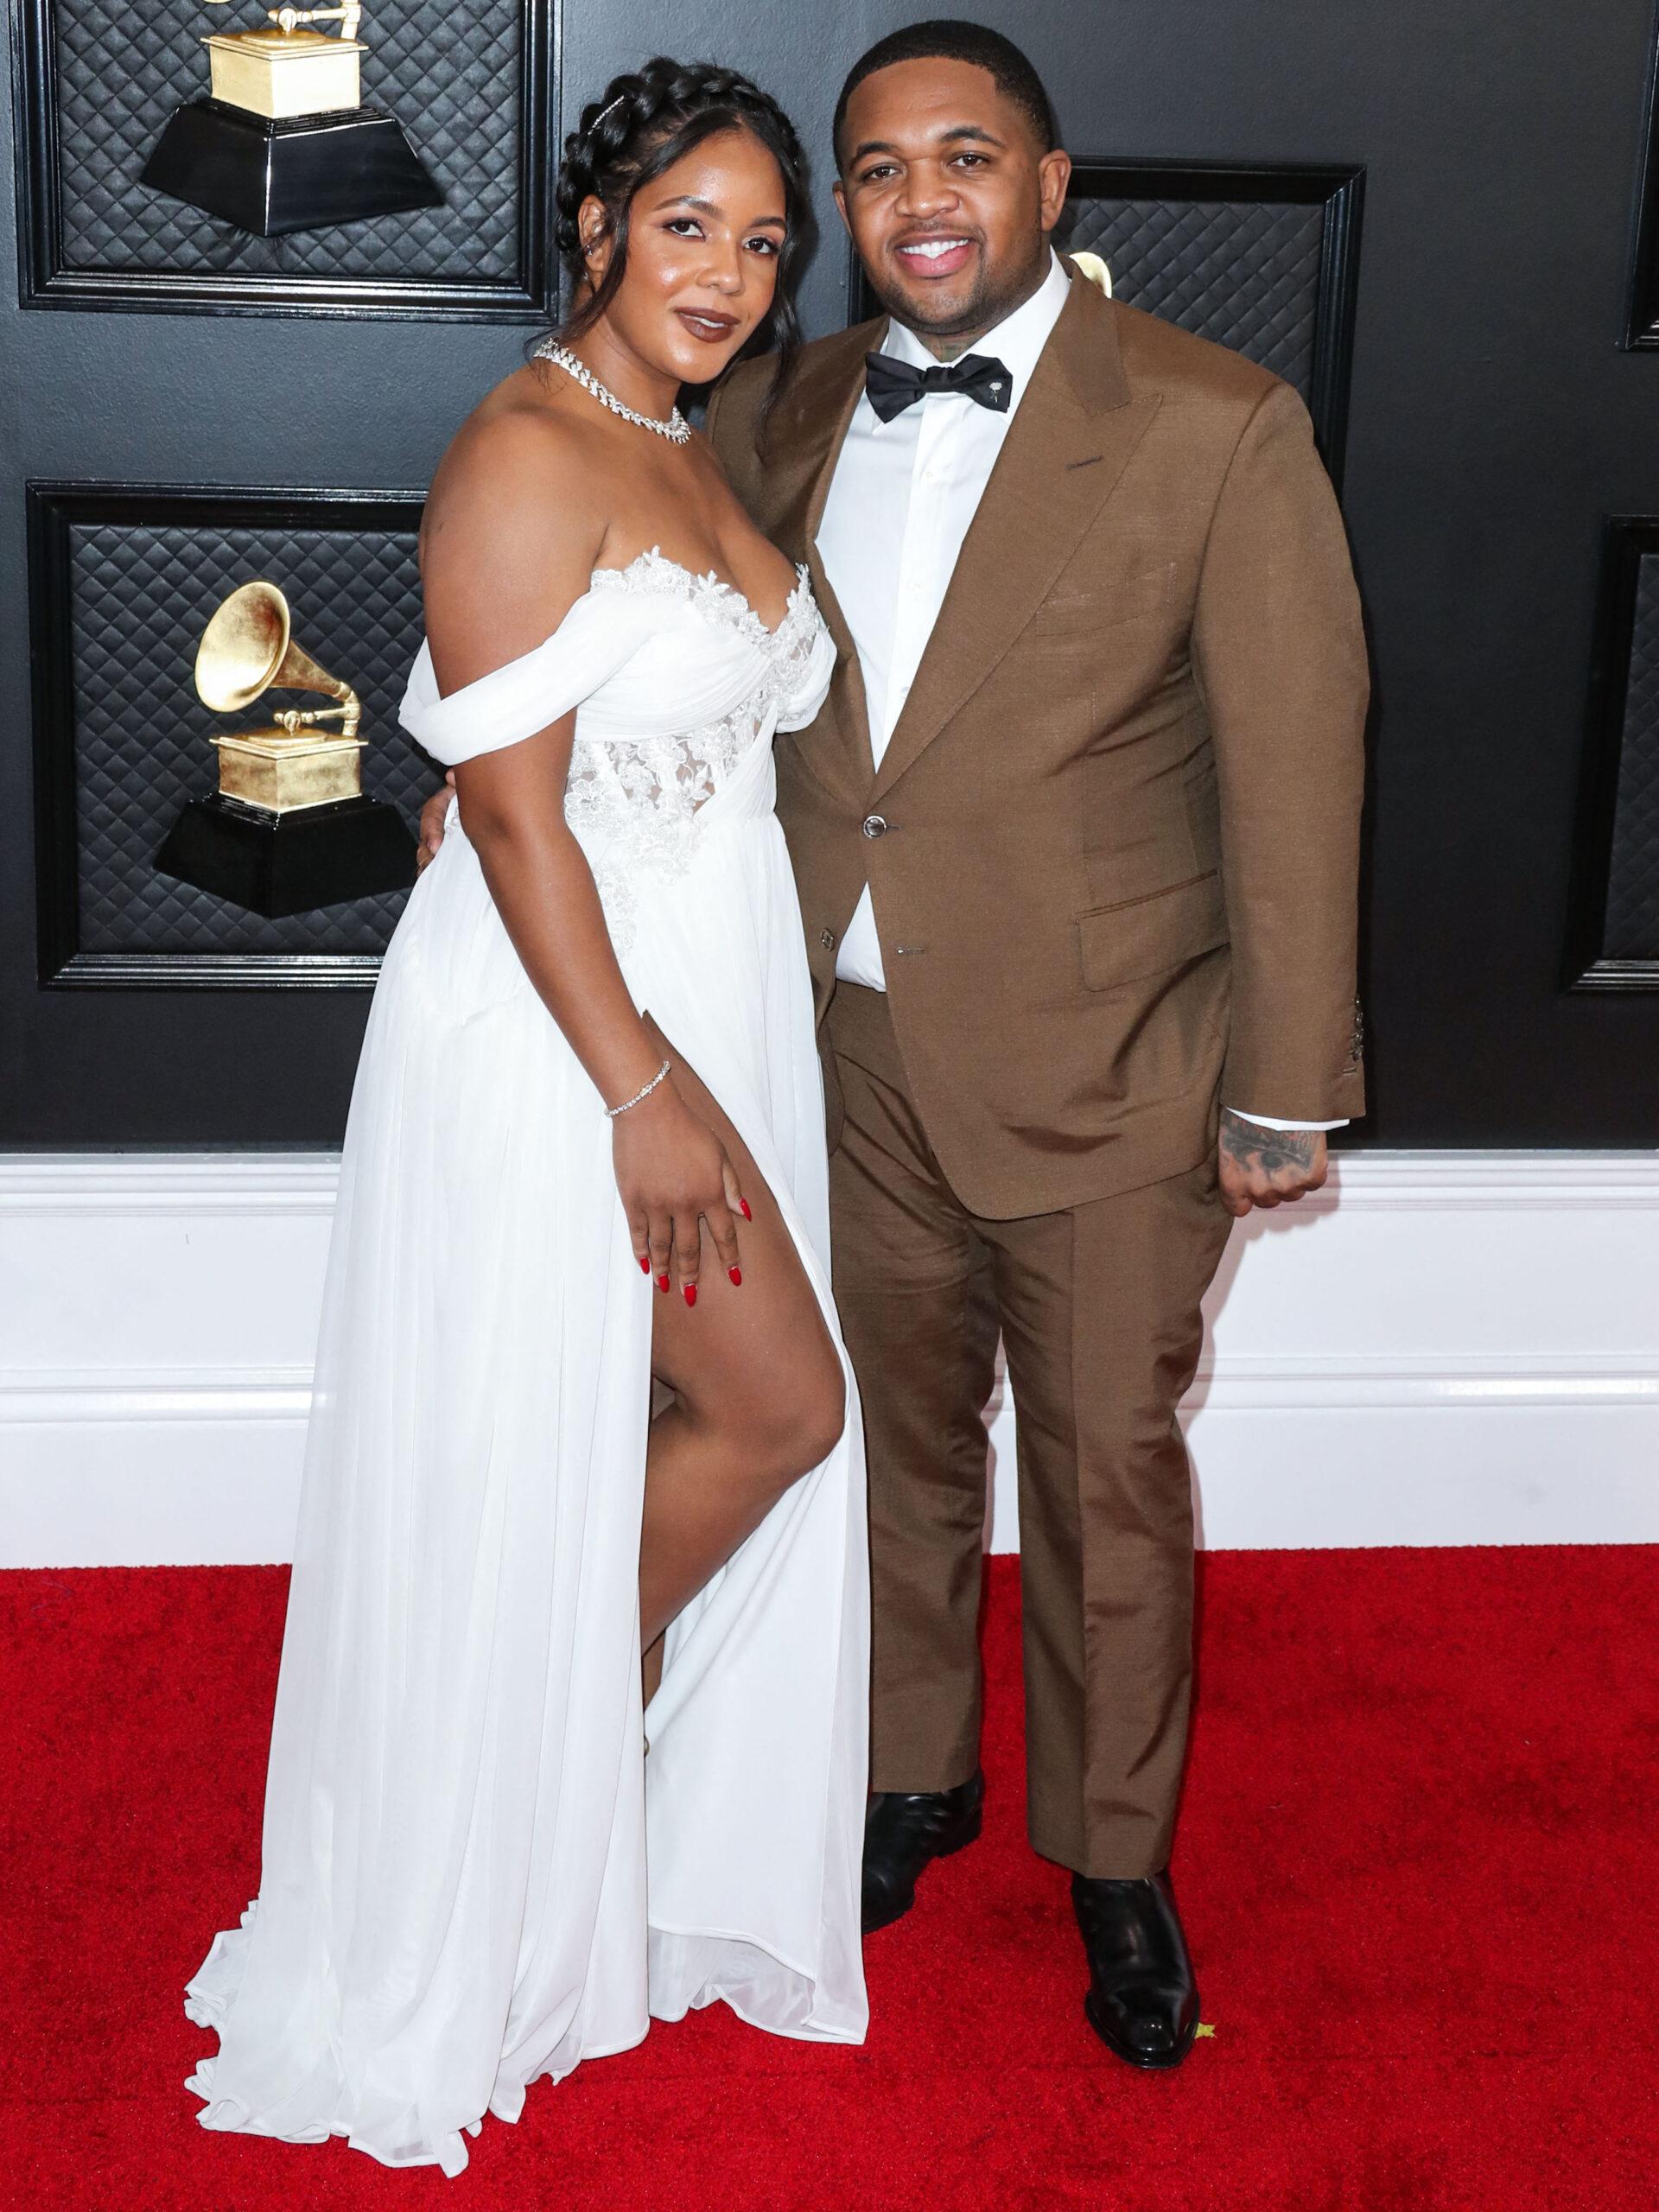 DJ Mustard and Chanel Thierry at the 62nd Annual GRAMMY Awards